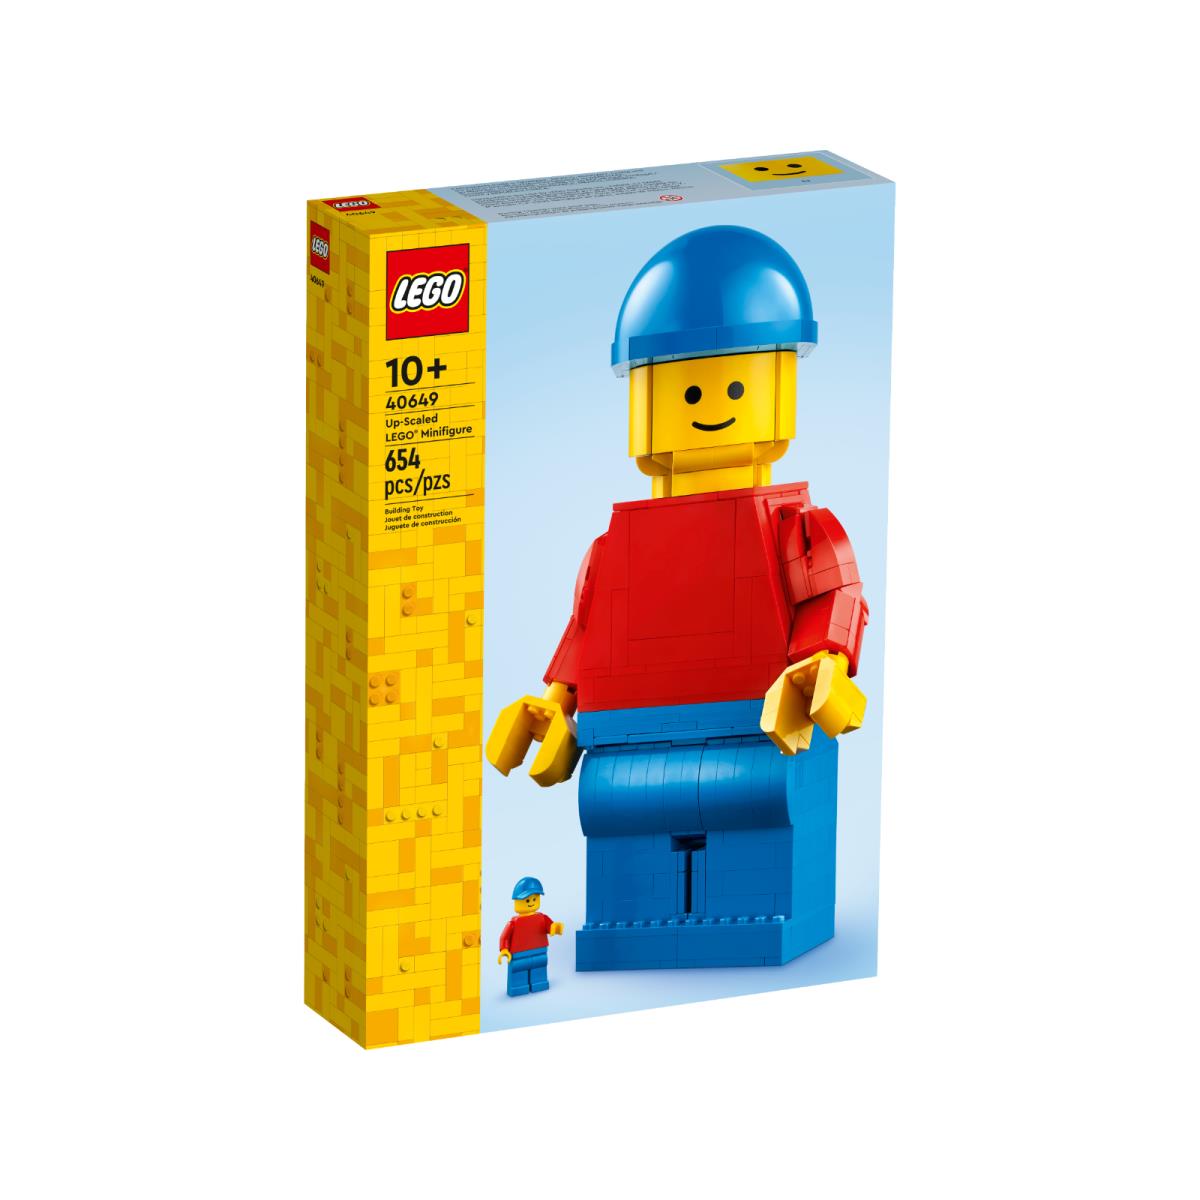 Lego 40649 Up-scaled Minifigure IN Hand Perfect Box Guarantee